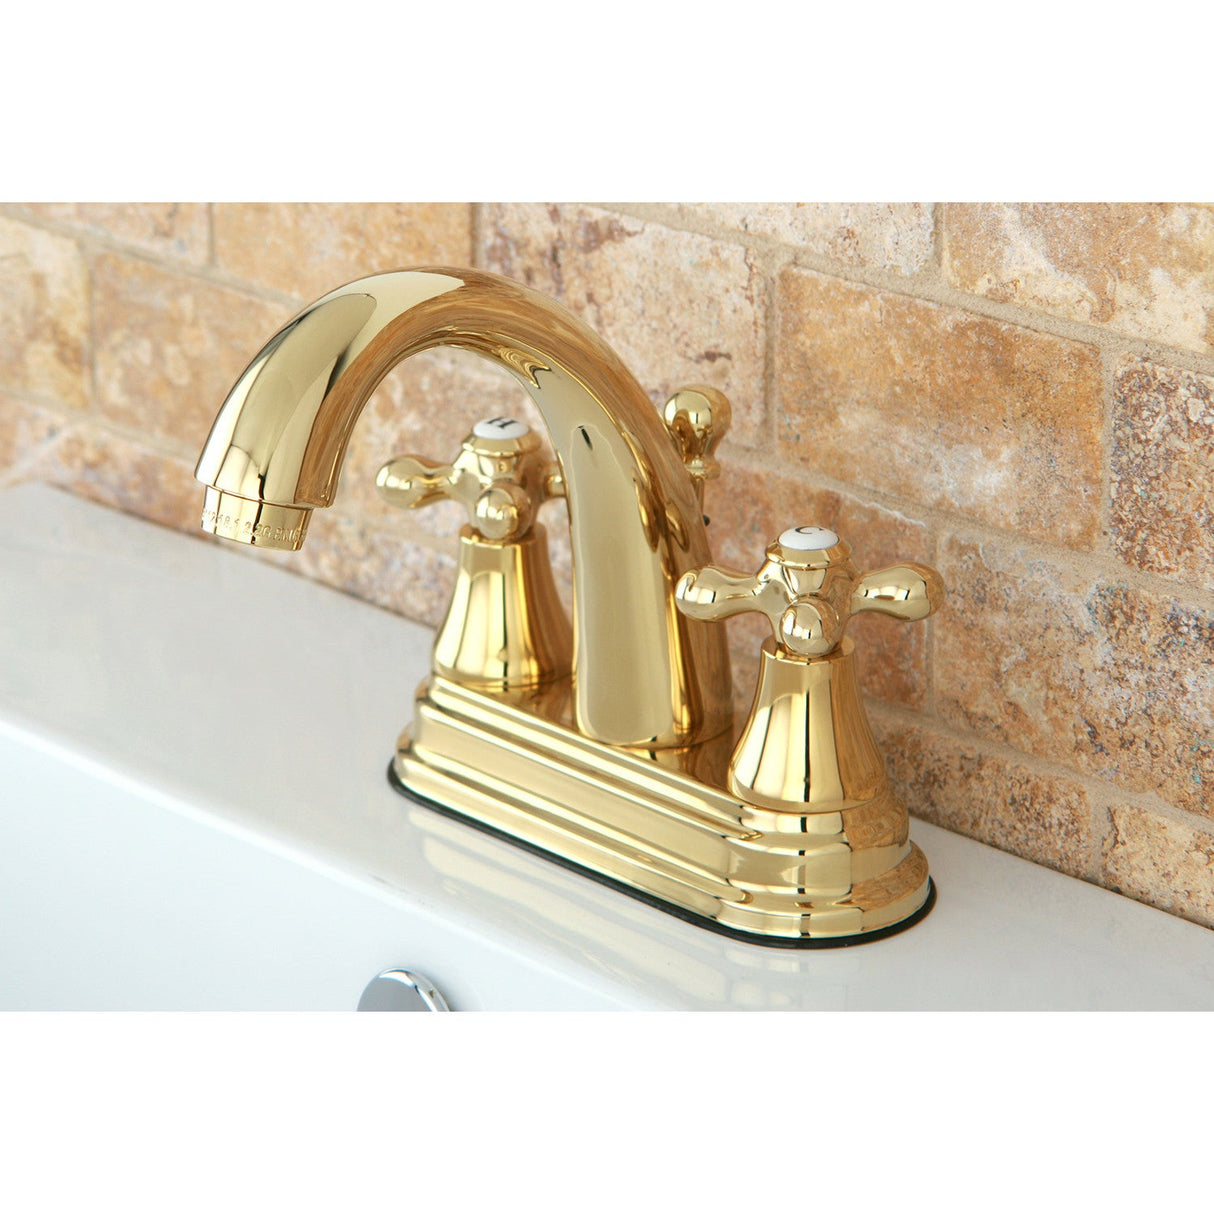 English Vintage KS7612AX Two-Handle 3-Hole Deck Mount 4" Centerset Bathroom Faucet with Brass Pop-Up, Polished Brass